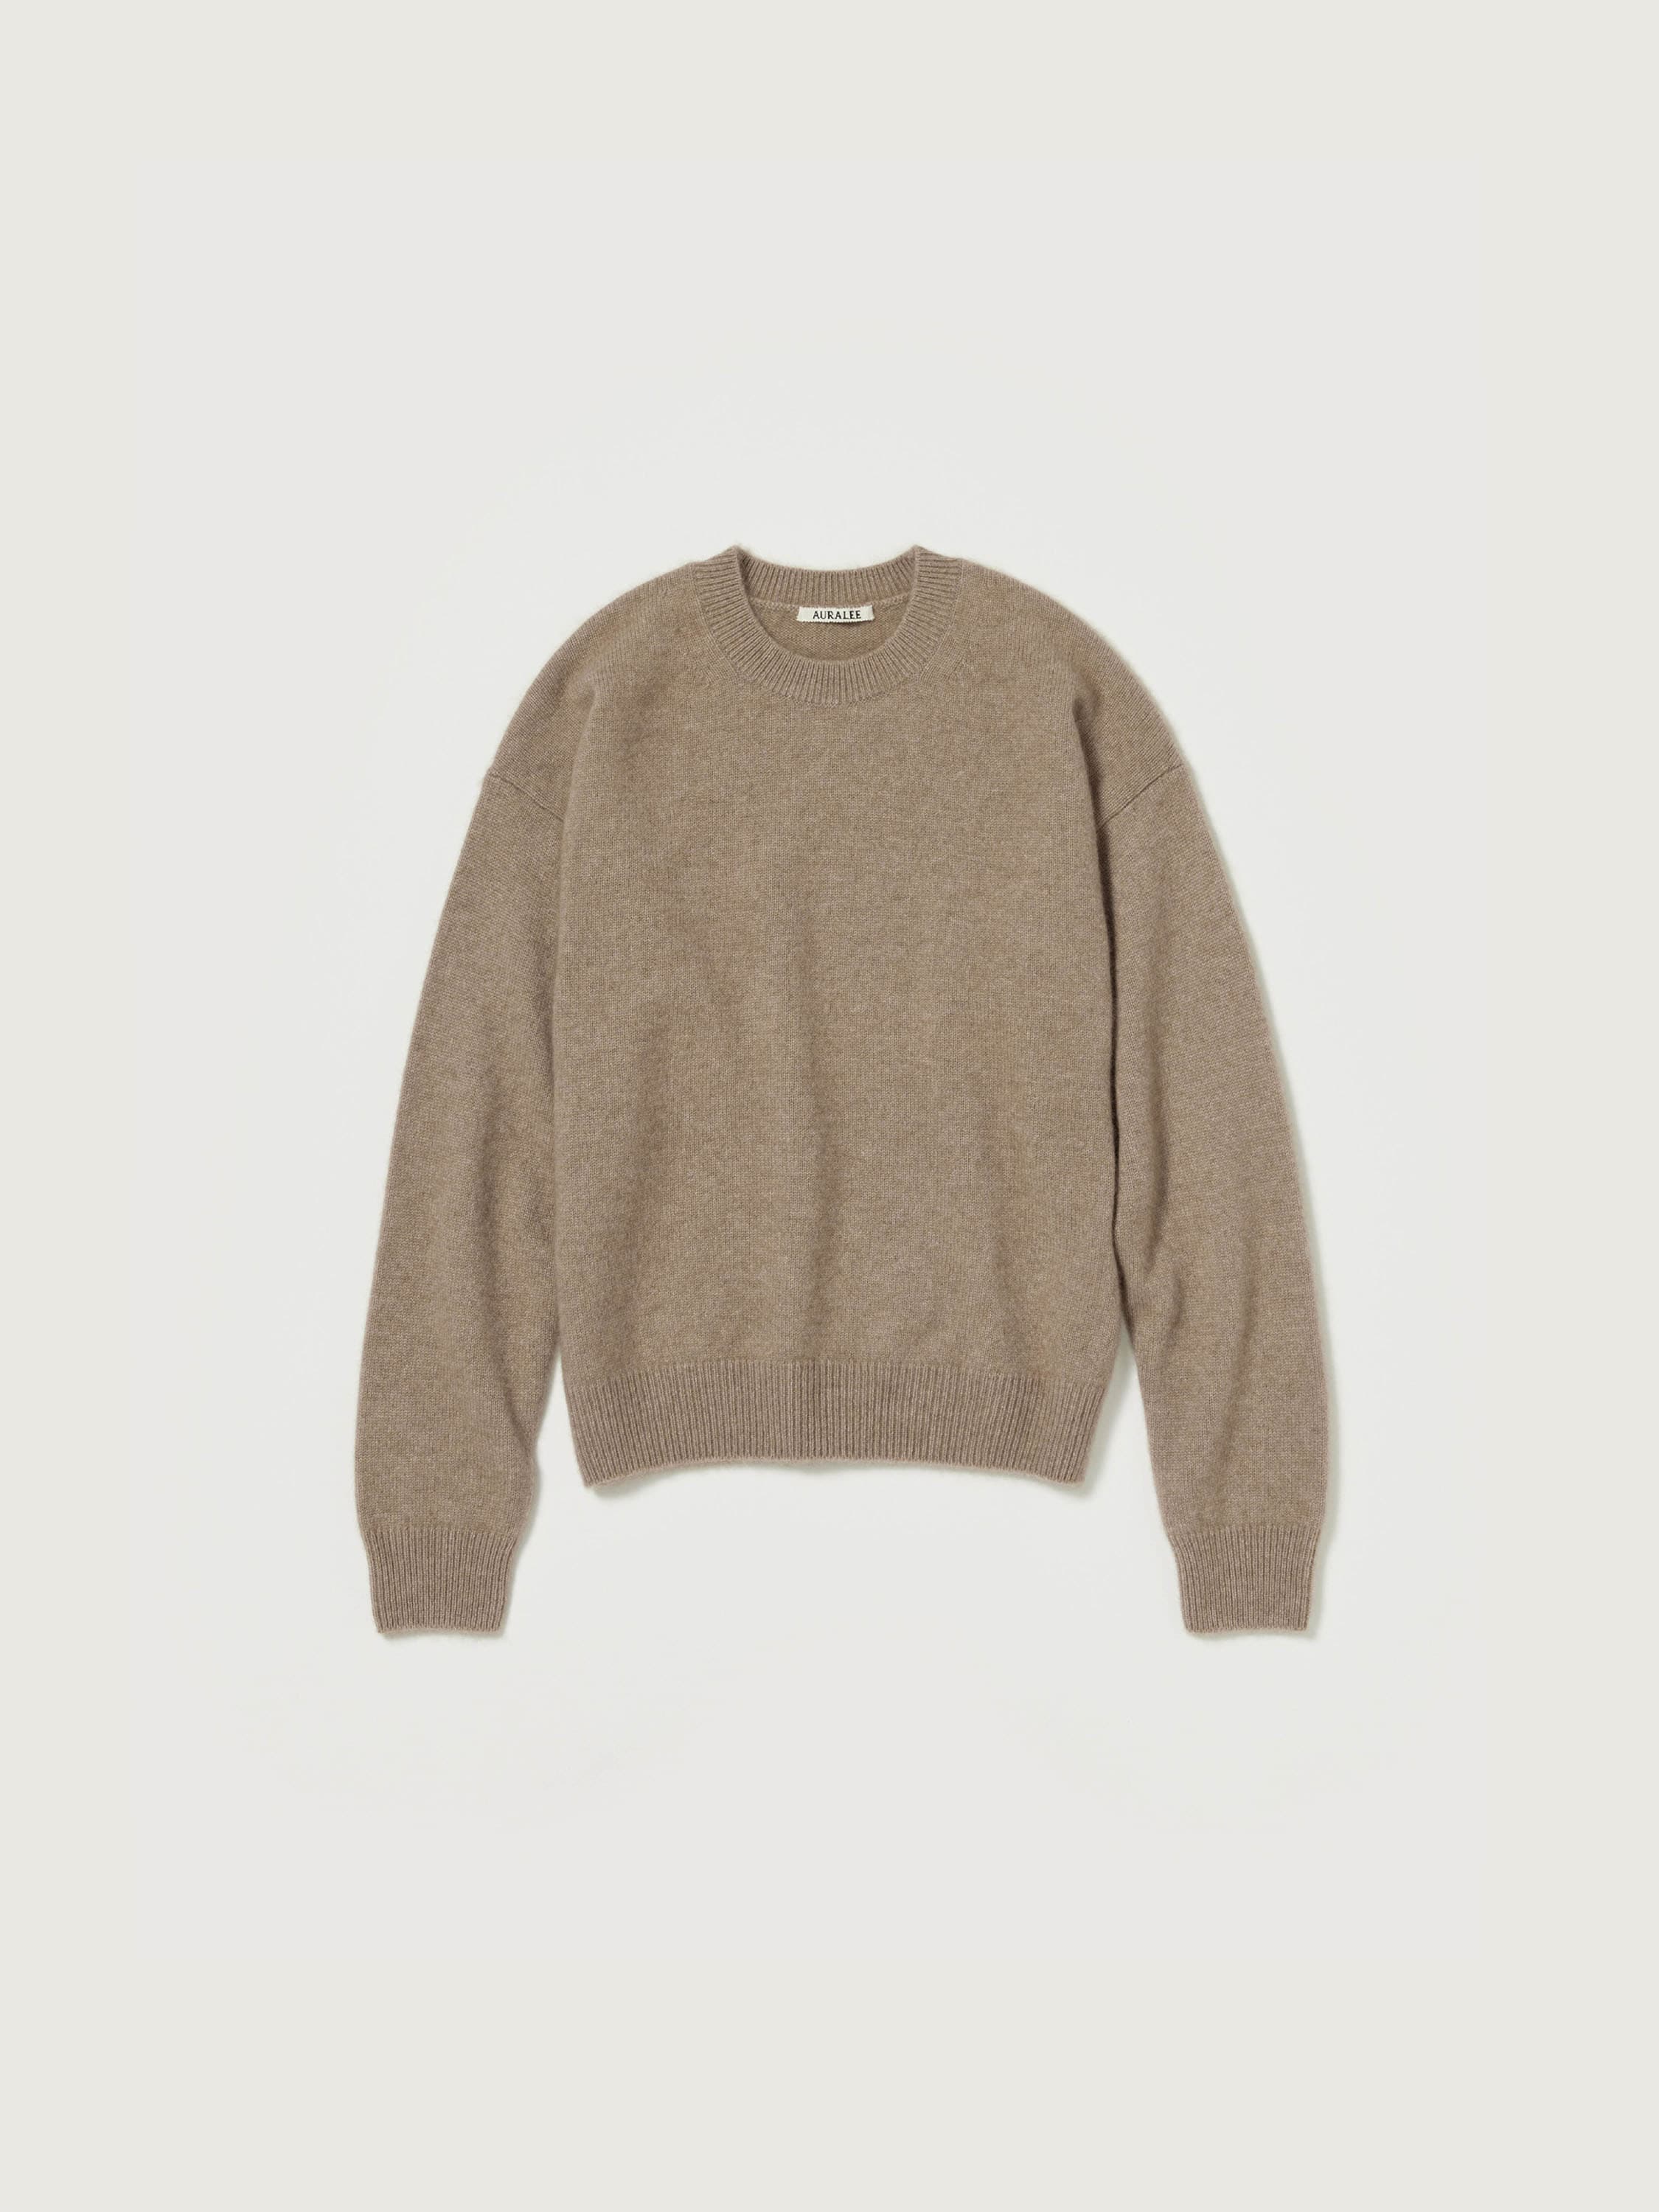 BABY CASHMERE KNIT P/O - AURALEE Official Website